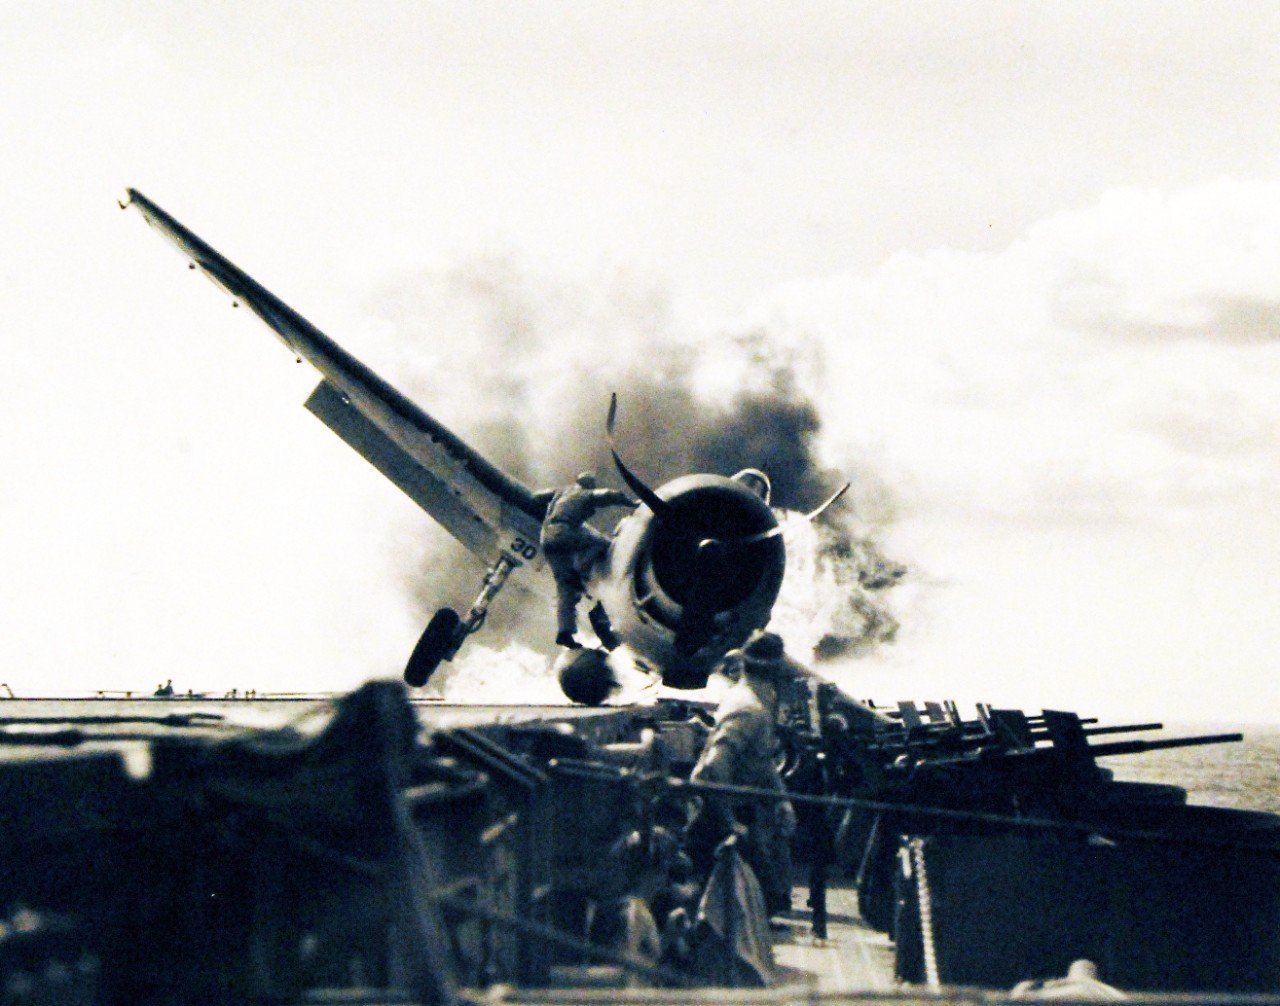 80-G-205473: USS Enterprise (CV-6). 1943.      Crash landing of F6F #30, piloted by Ensign Bryon M. Johnson on the flight deck while enroute to attack Makin Island in the Gilbert Islands.   Lieutenant Walter L. Chewning, USNR, catapult officer, clambering up the side of the plane to assist pilot Ensign Johnson, from the flaming cockpit.  Johnson escaped with little personal damage.   Photograph released November 10, 1943.    Official U.S. Navy photograph, now in the collections of the National Archives.  (2016/11/15).